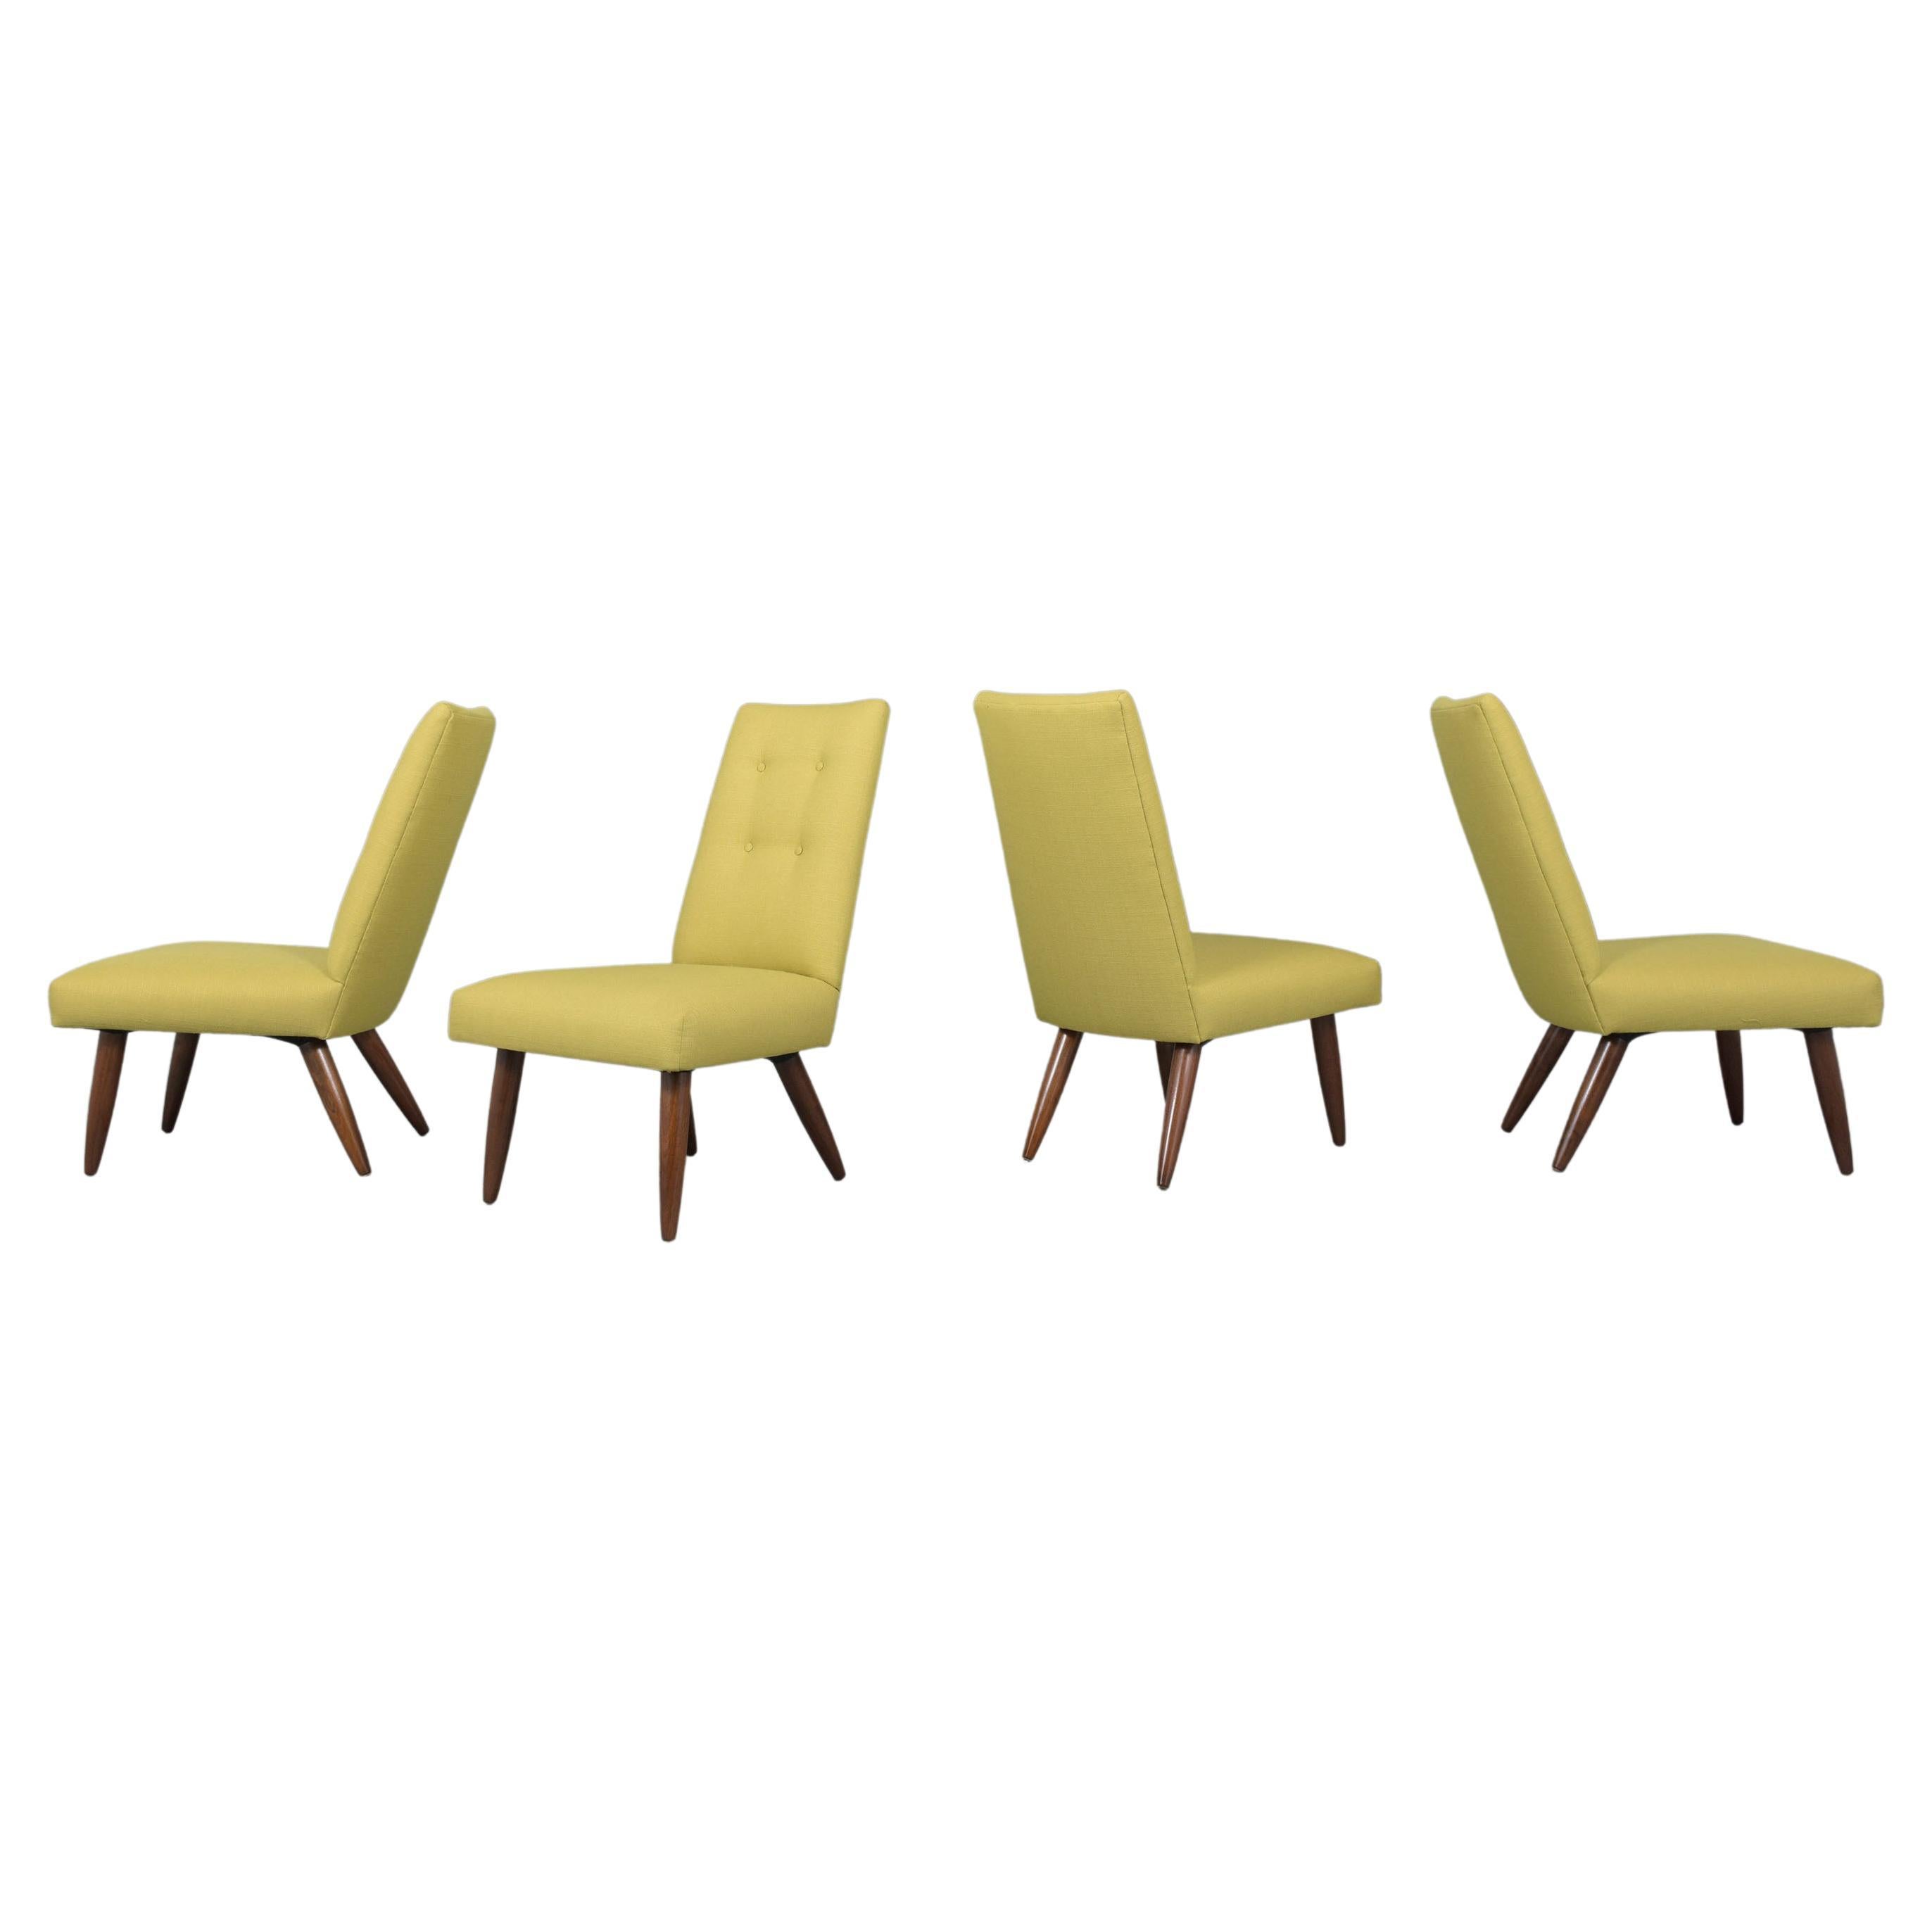 Set of Four Danish Modern Upholstered Dining Chairs